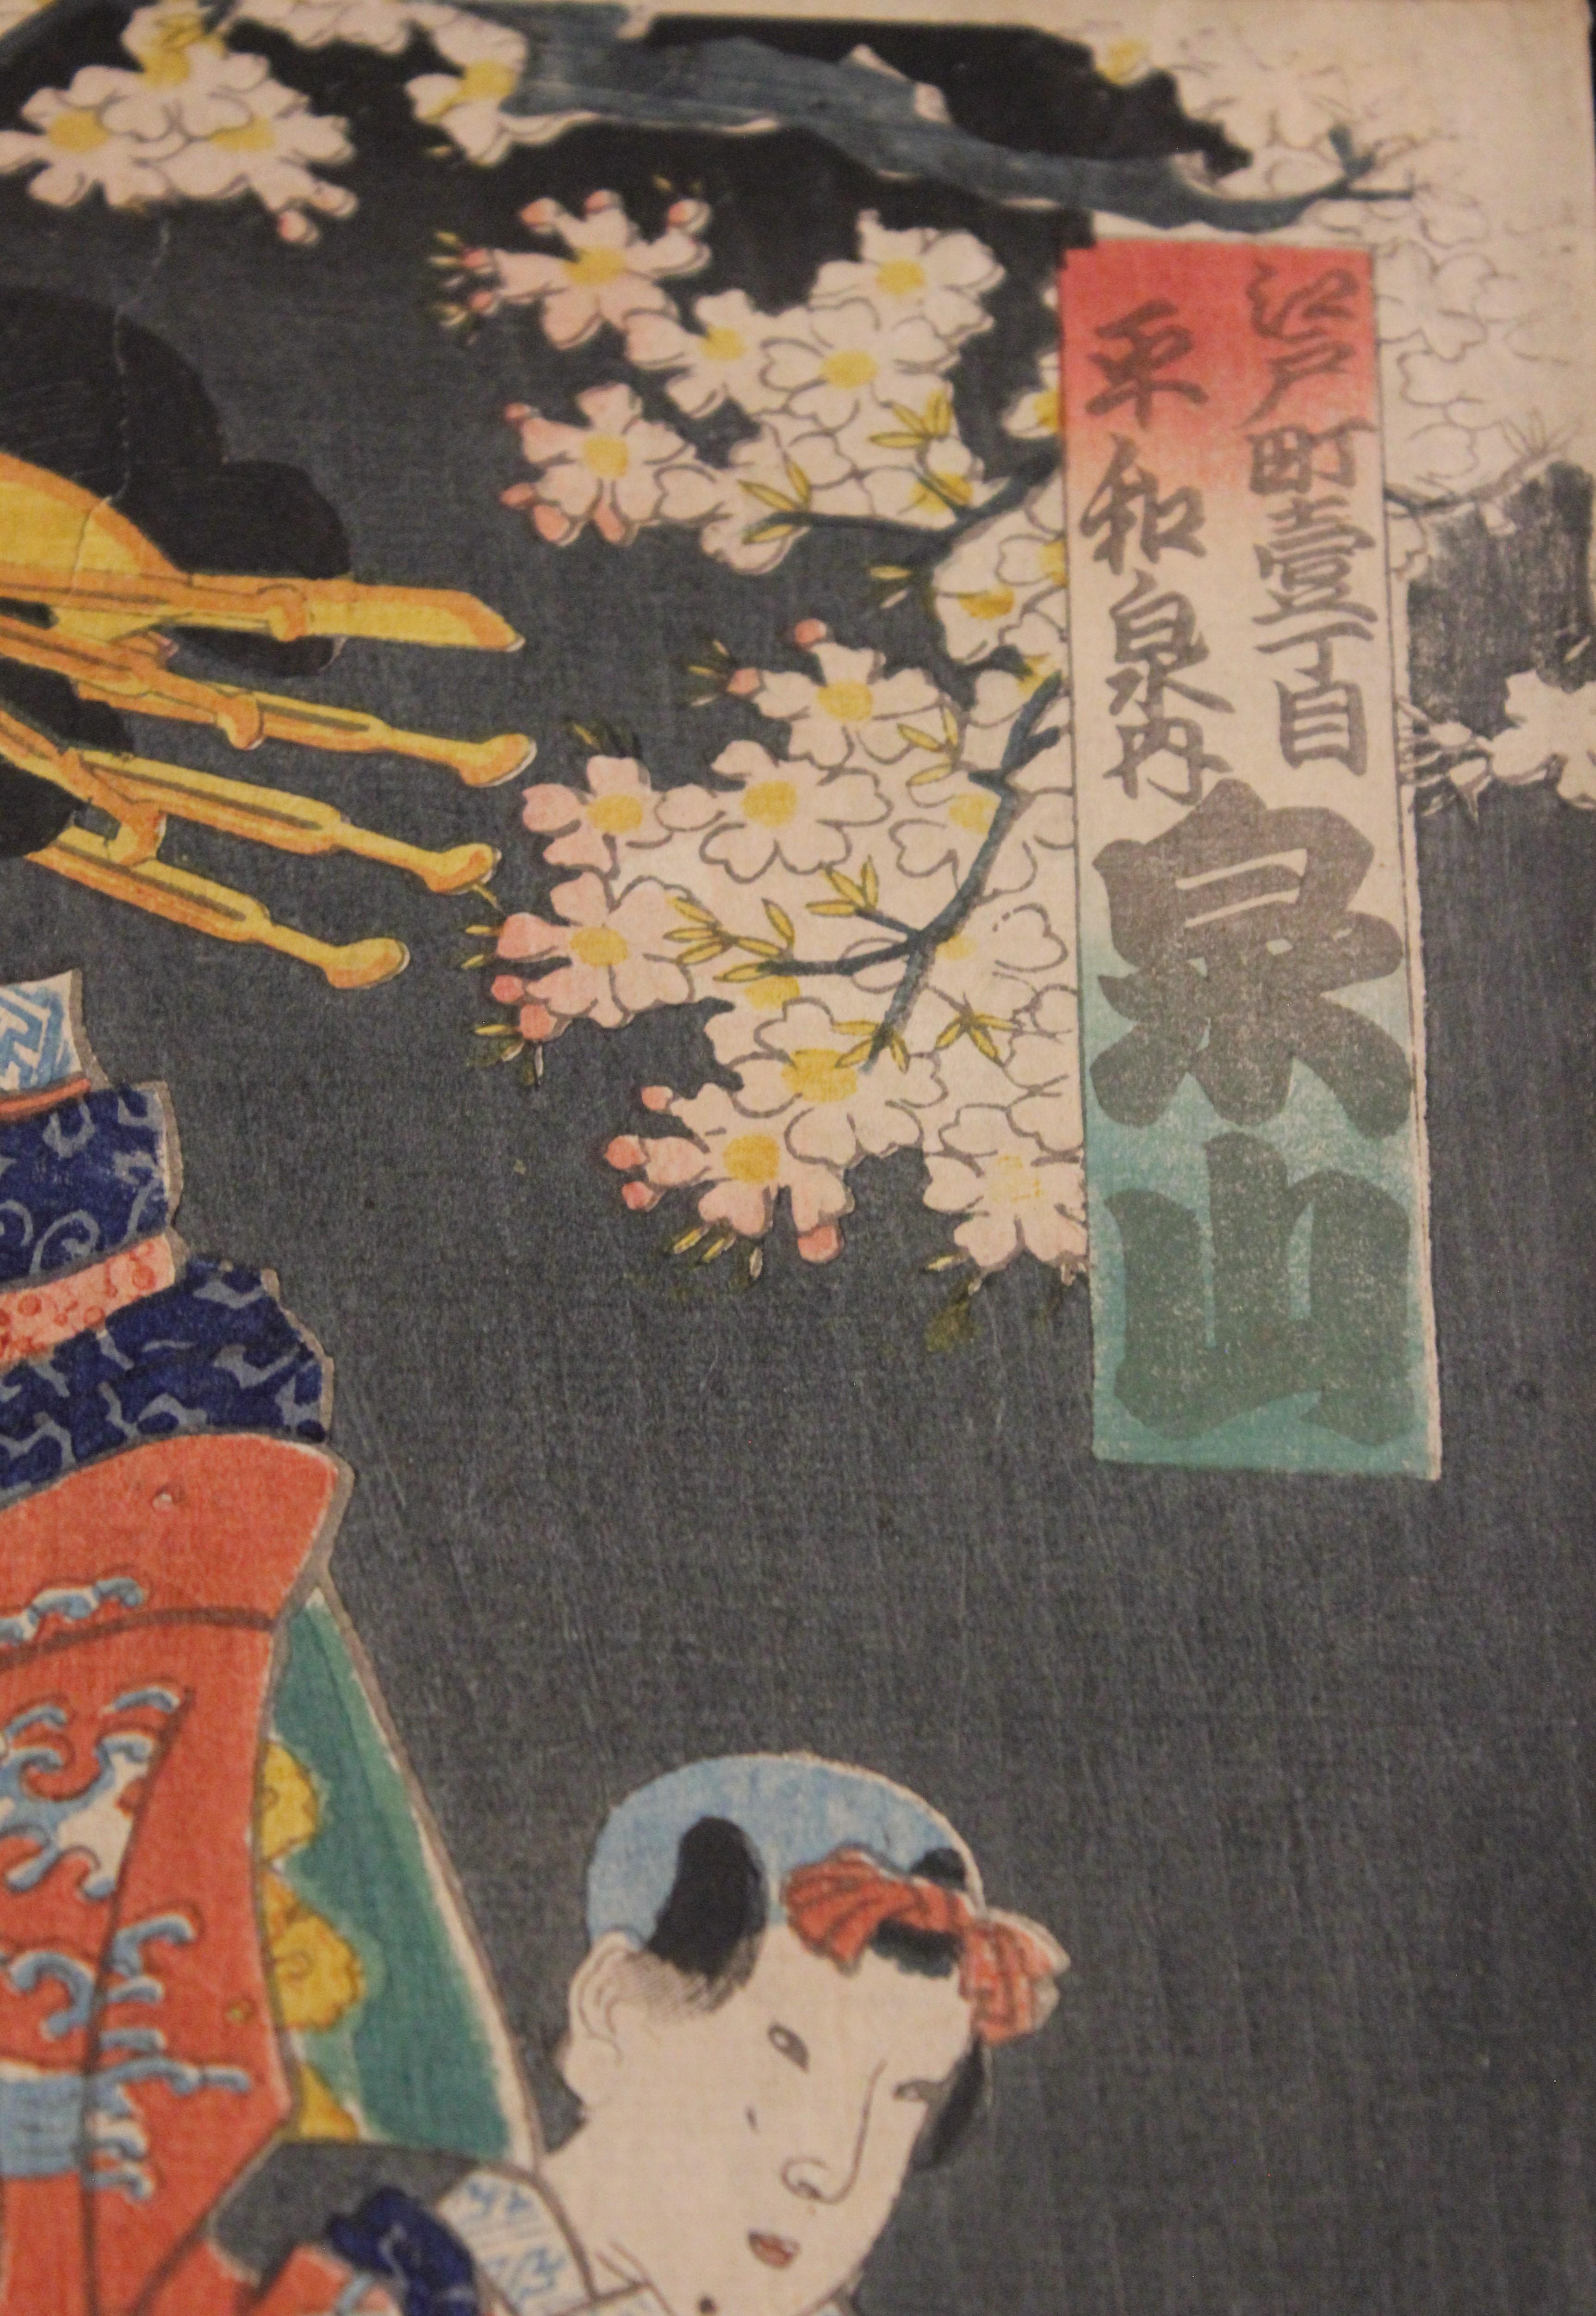 Beautiful women dressed in traditional Japanese attire with a koi fish on the back of her kimono. By her side is a child with the same attire as the woman. The woodblock print is printed on rice paper. The print is not framed.

Artist Biography: